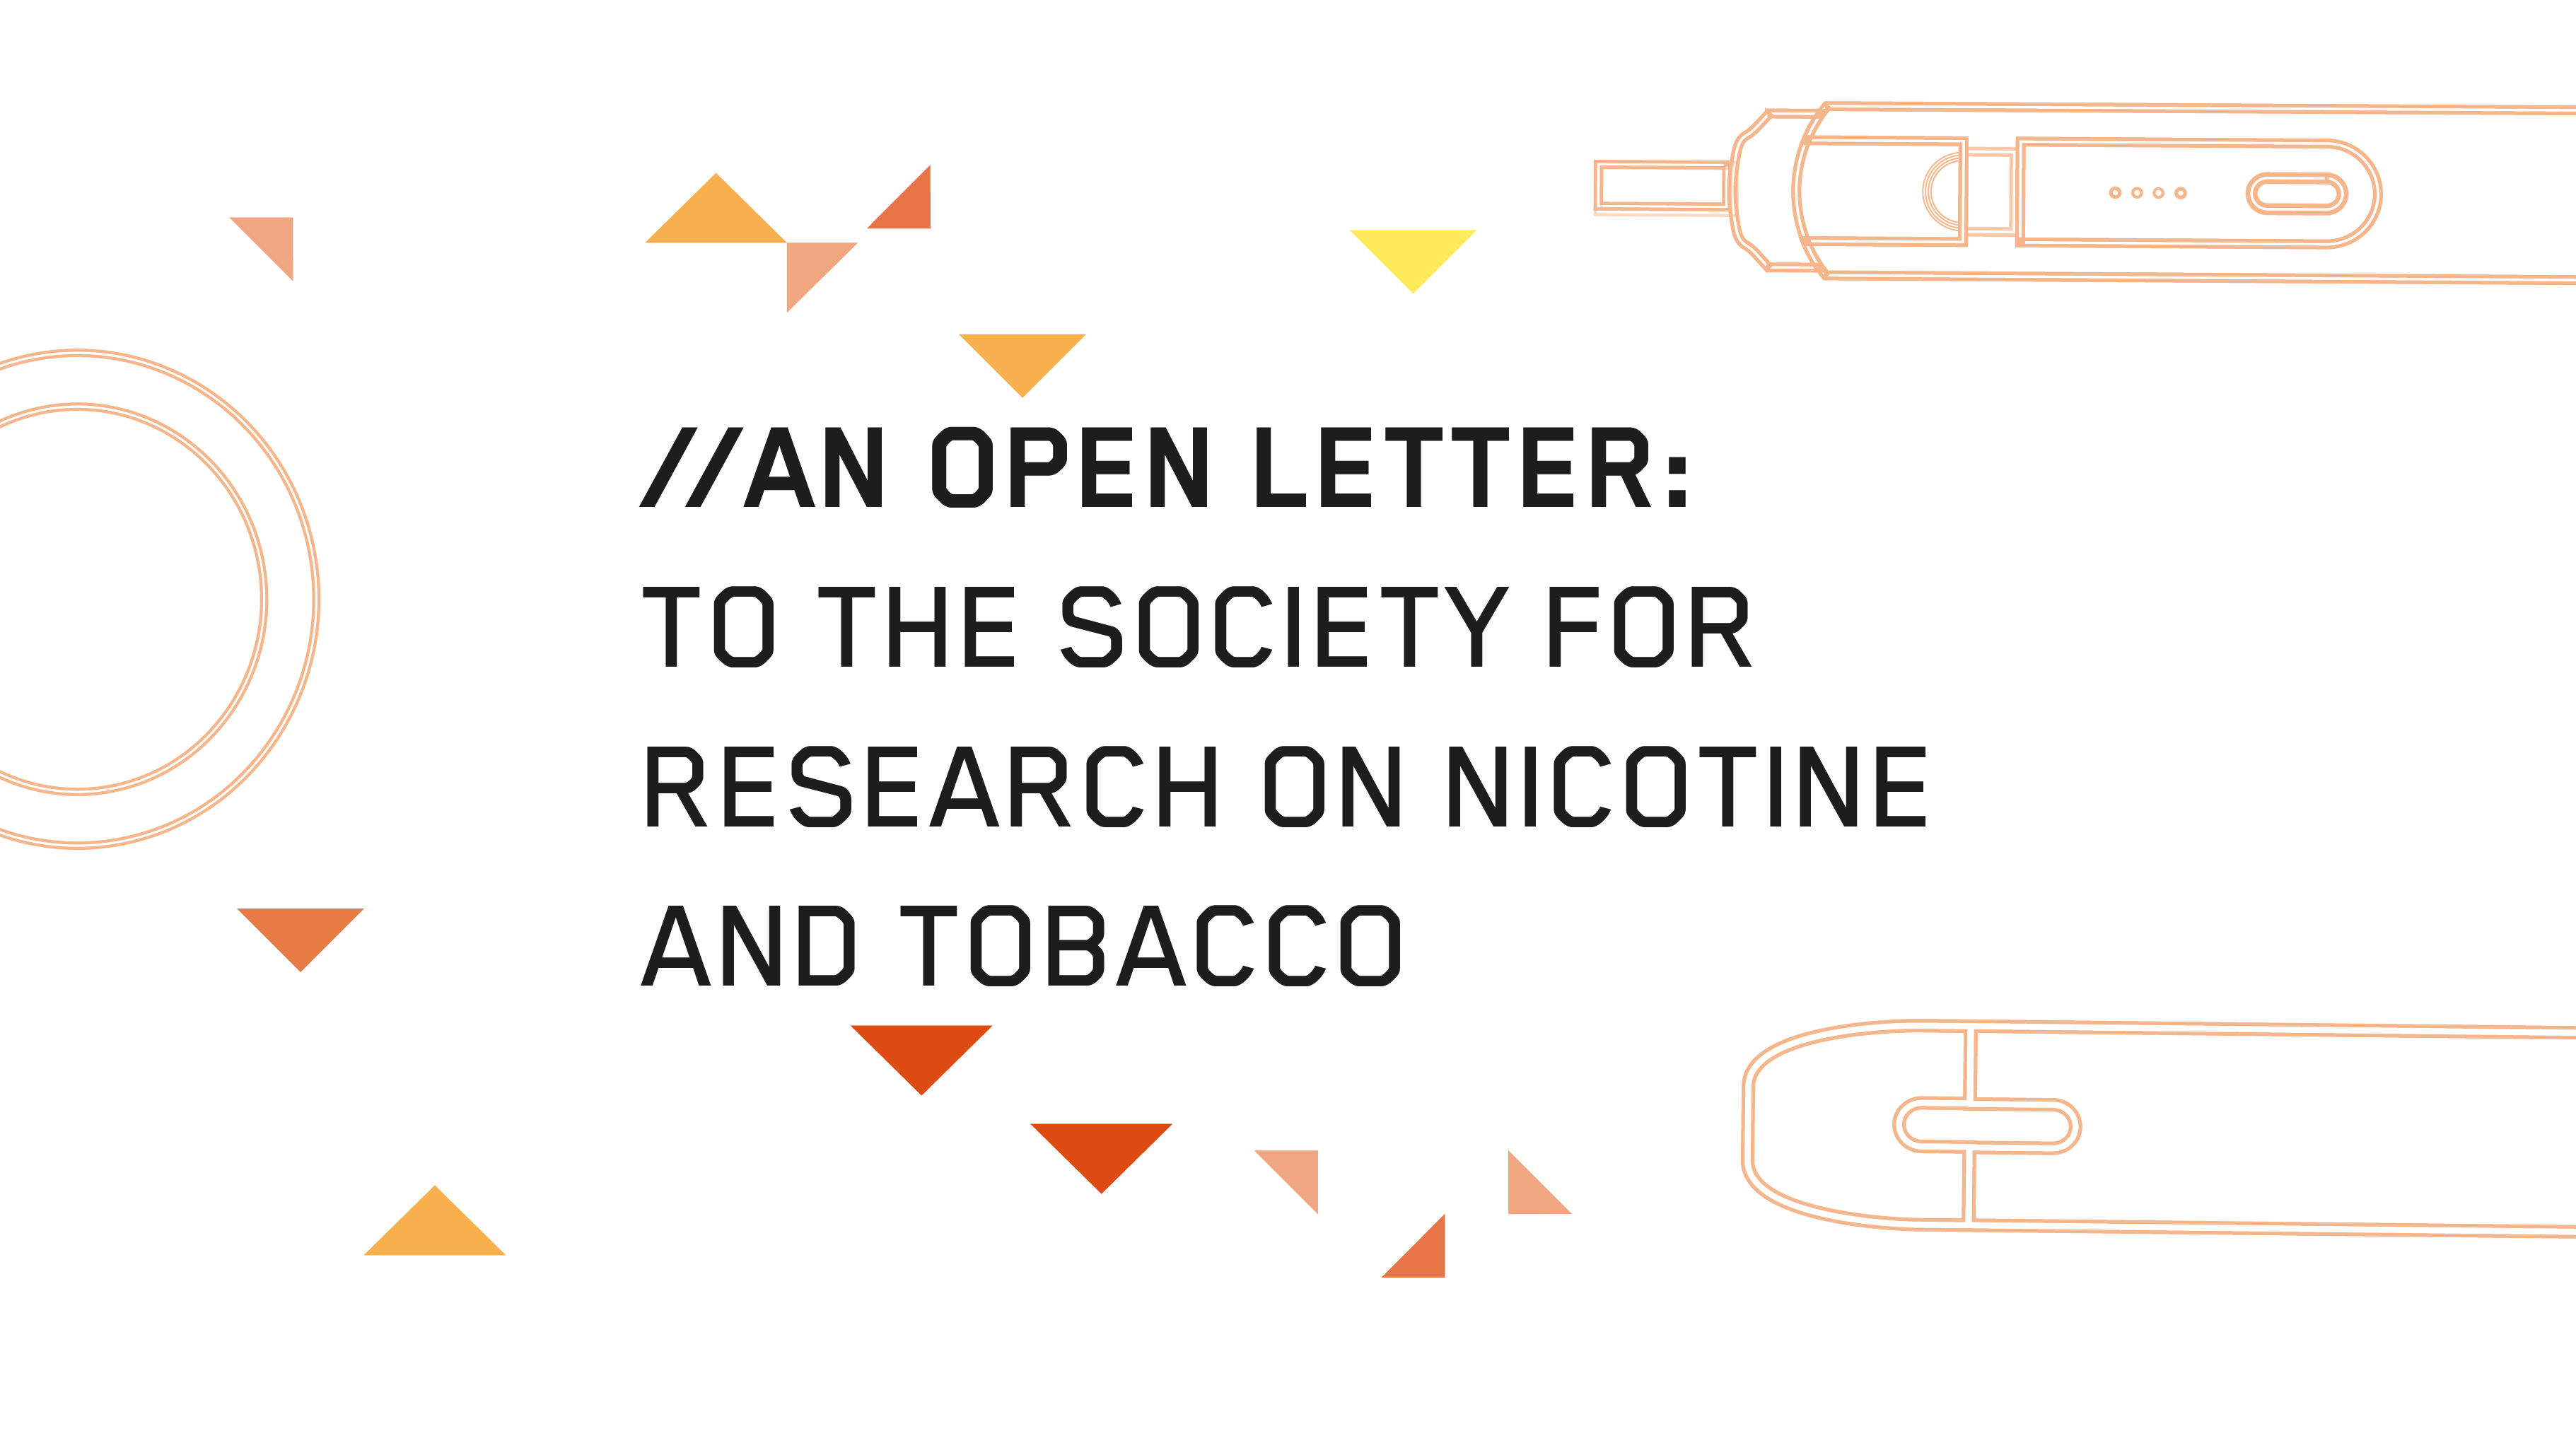 An open letter to the Society for Research on Nicotine and Tobacco